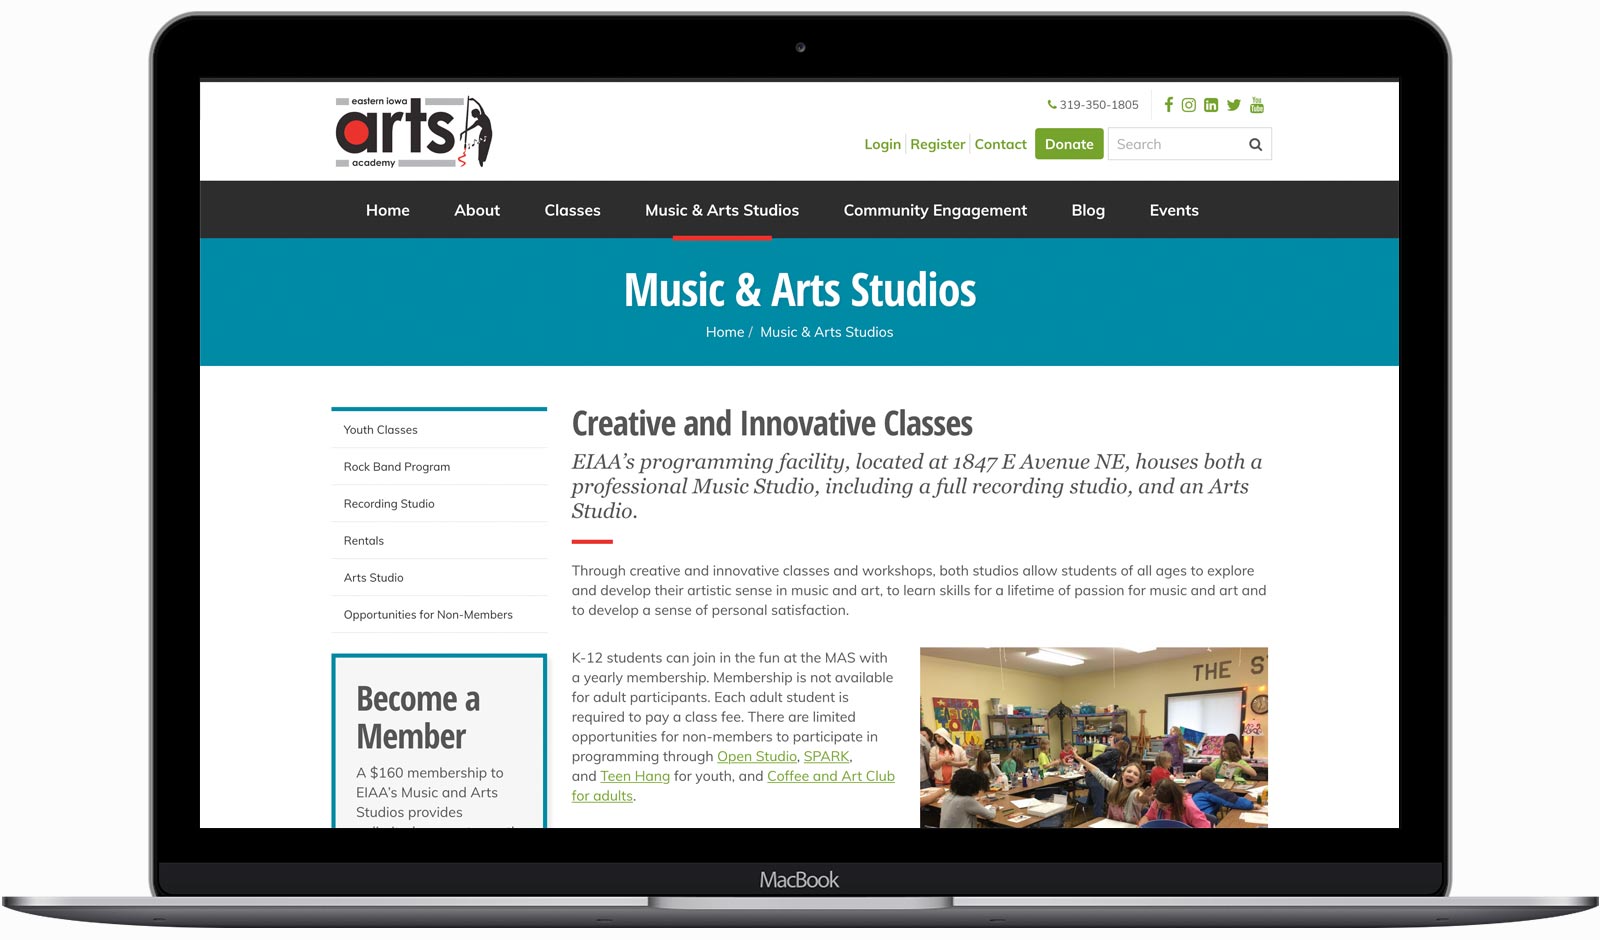 The Easter Iowa Arts Academy website on a laptop computer